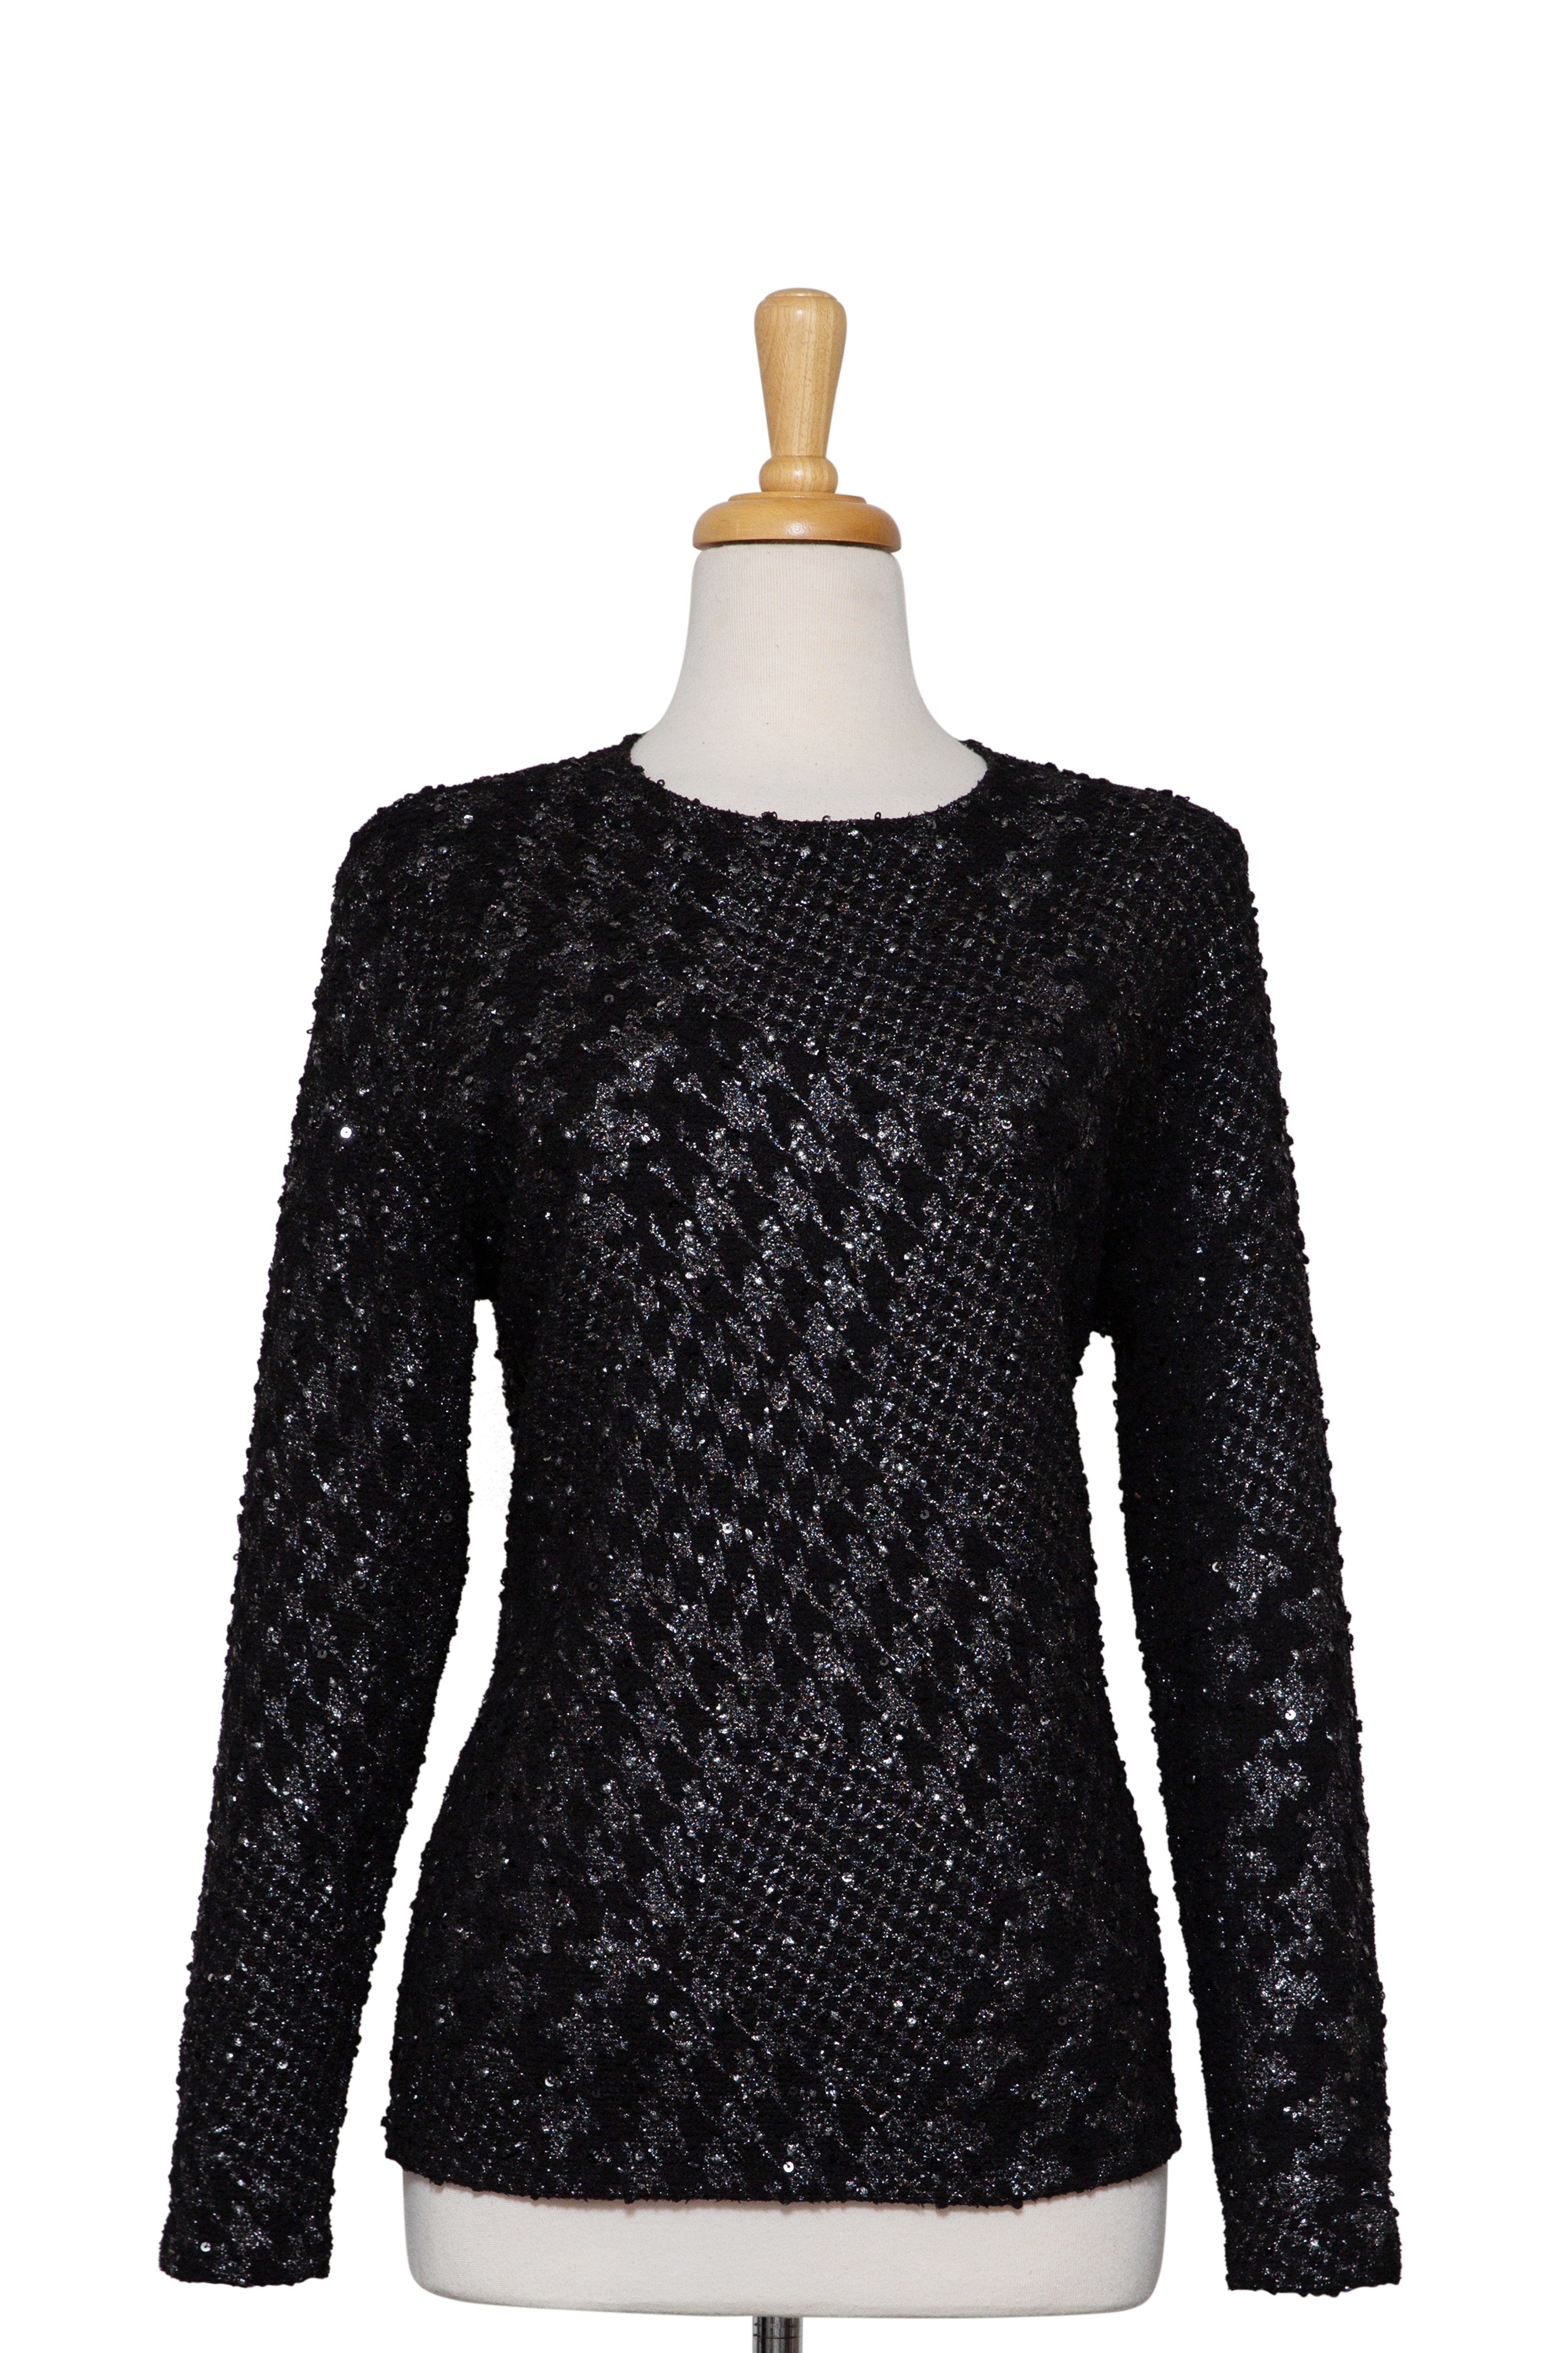 Black and Silver Metallic with Boucle Long Sequins Dispersed Knit Sleeve Top